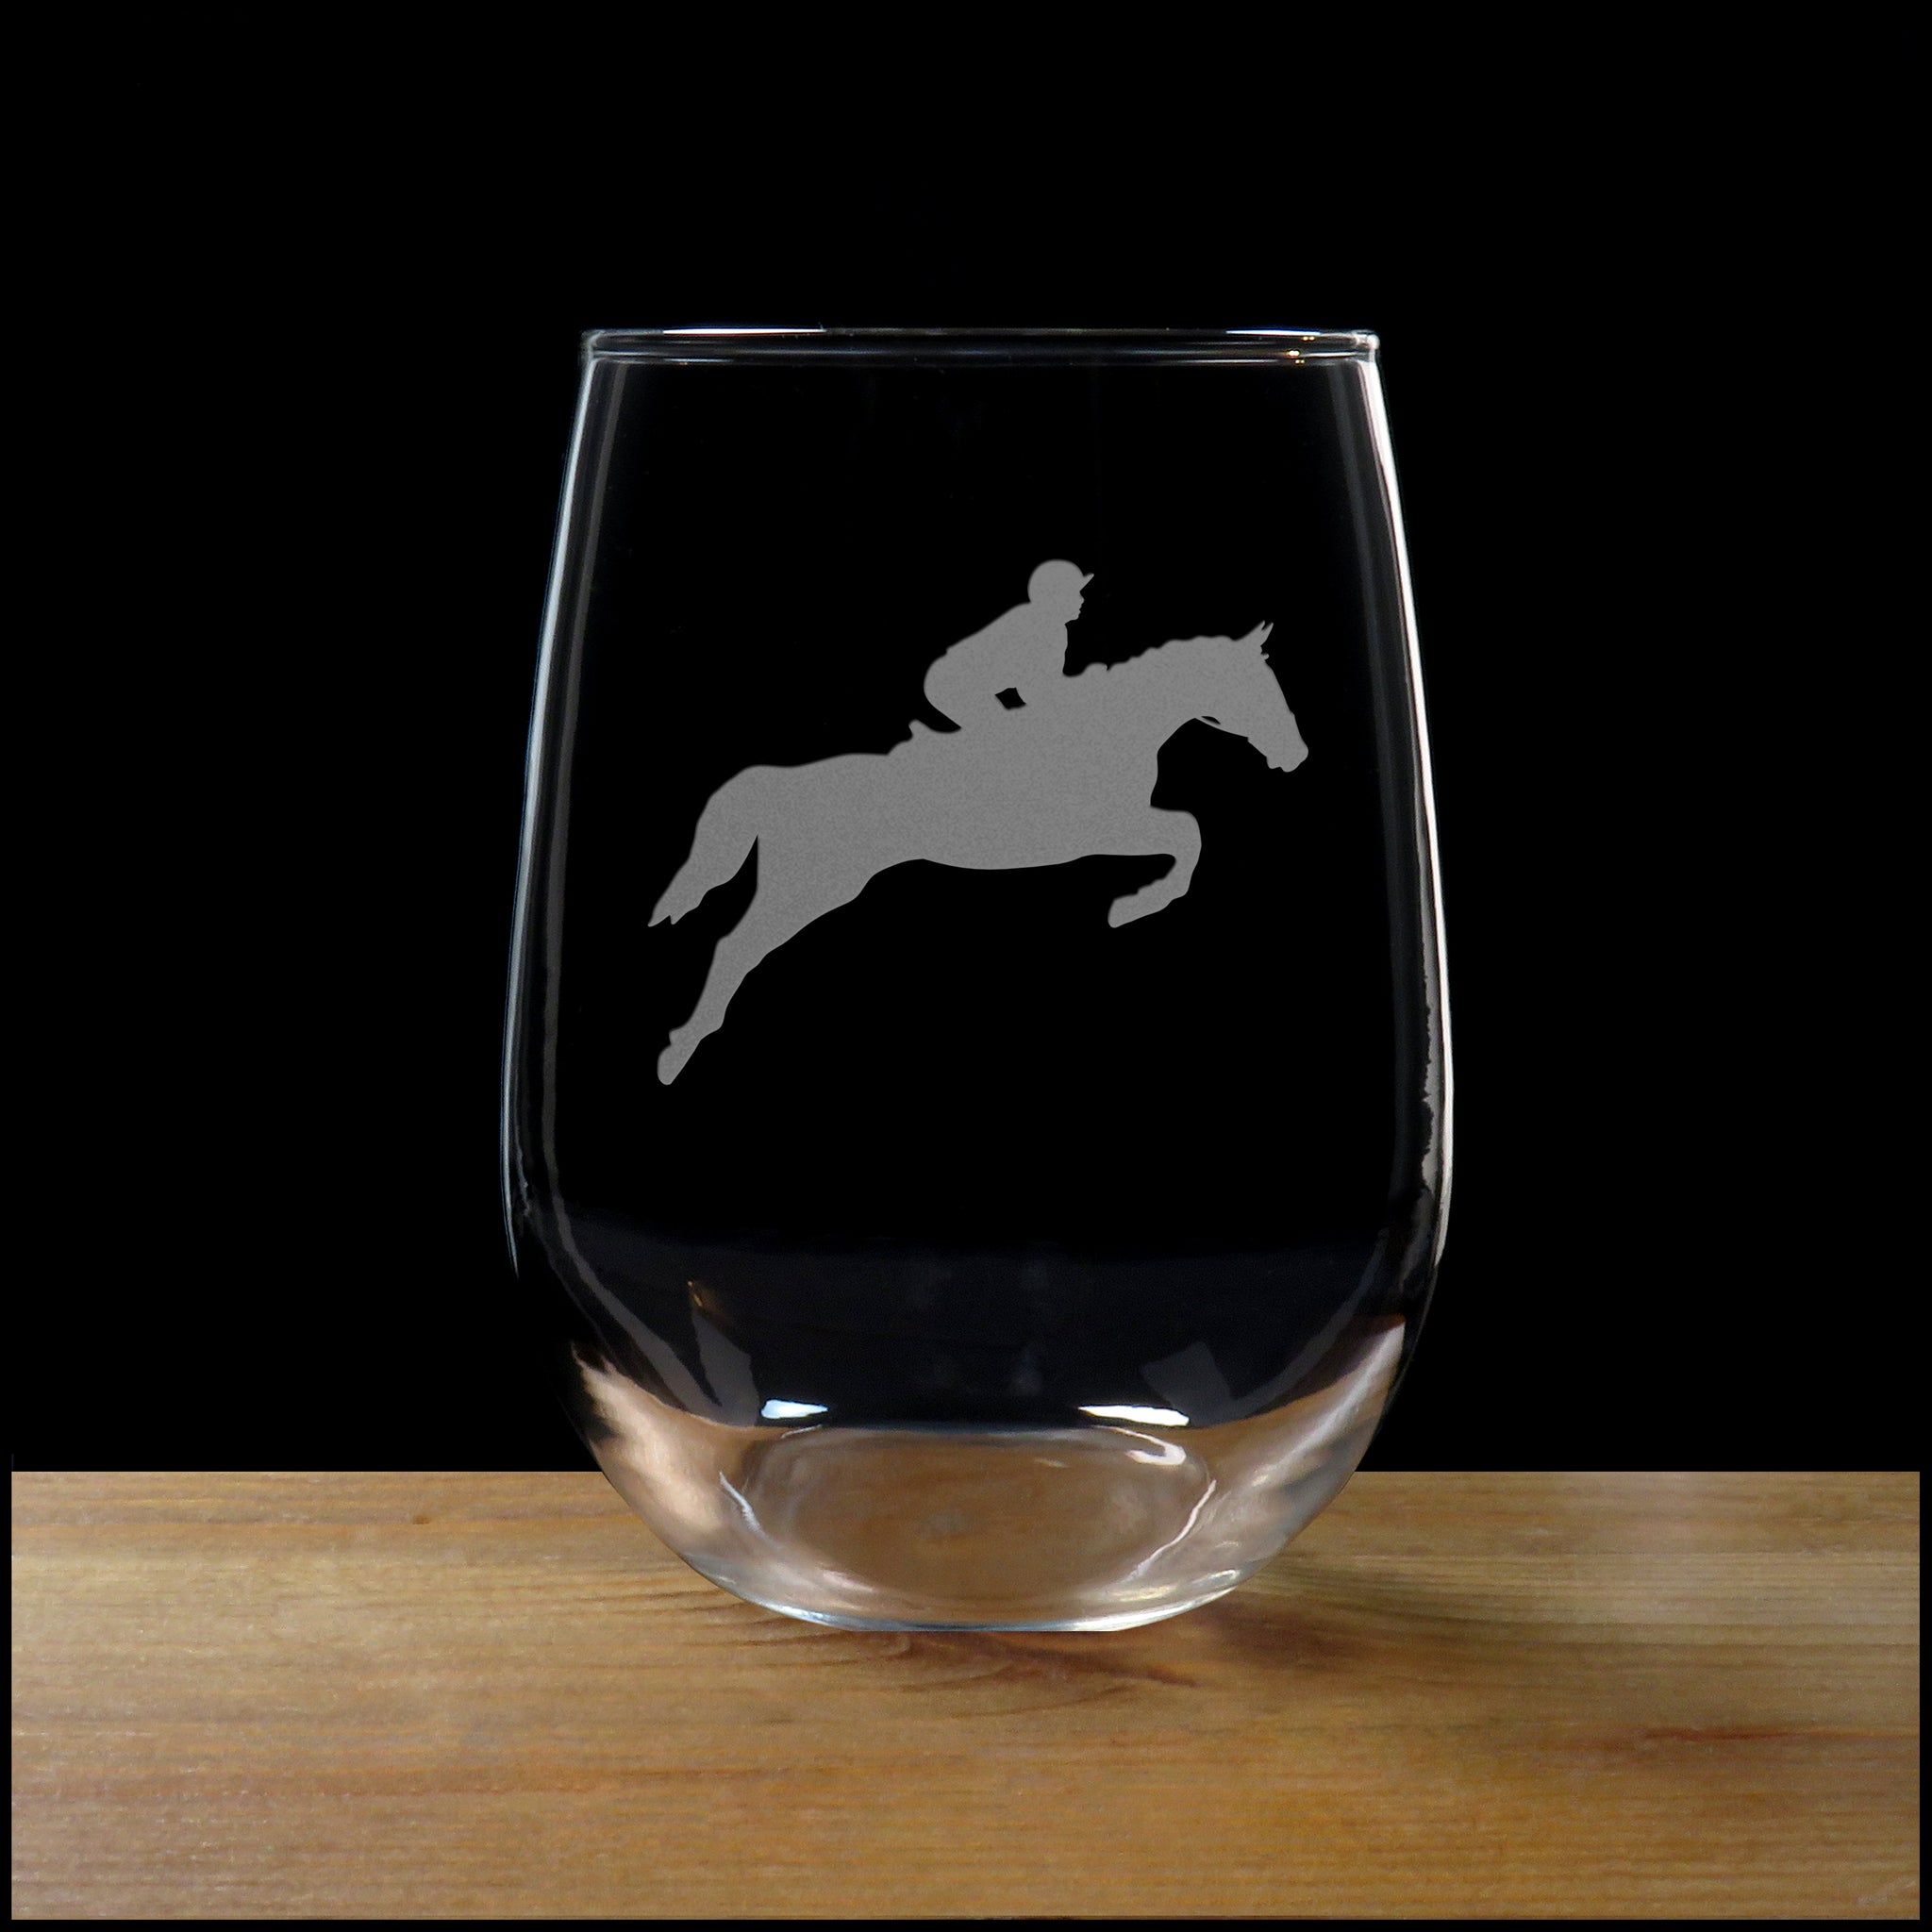 Horse and Rider Stemless Wine Glass - Copyright Hues in Glass